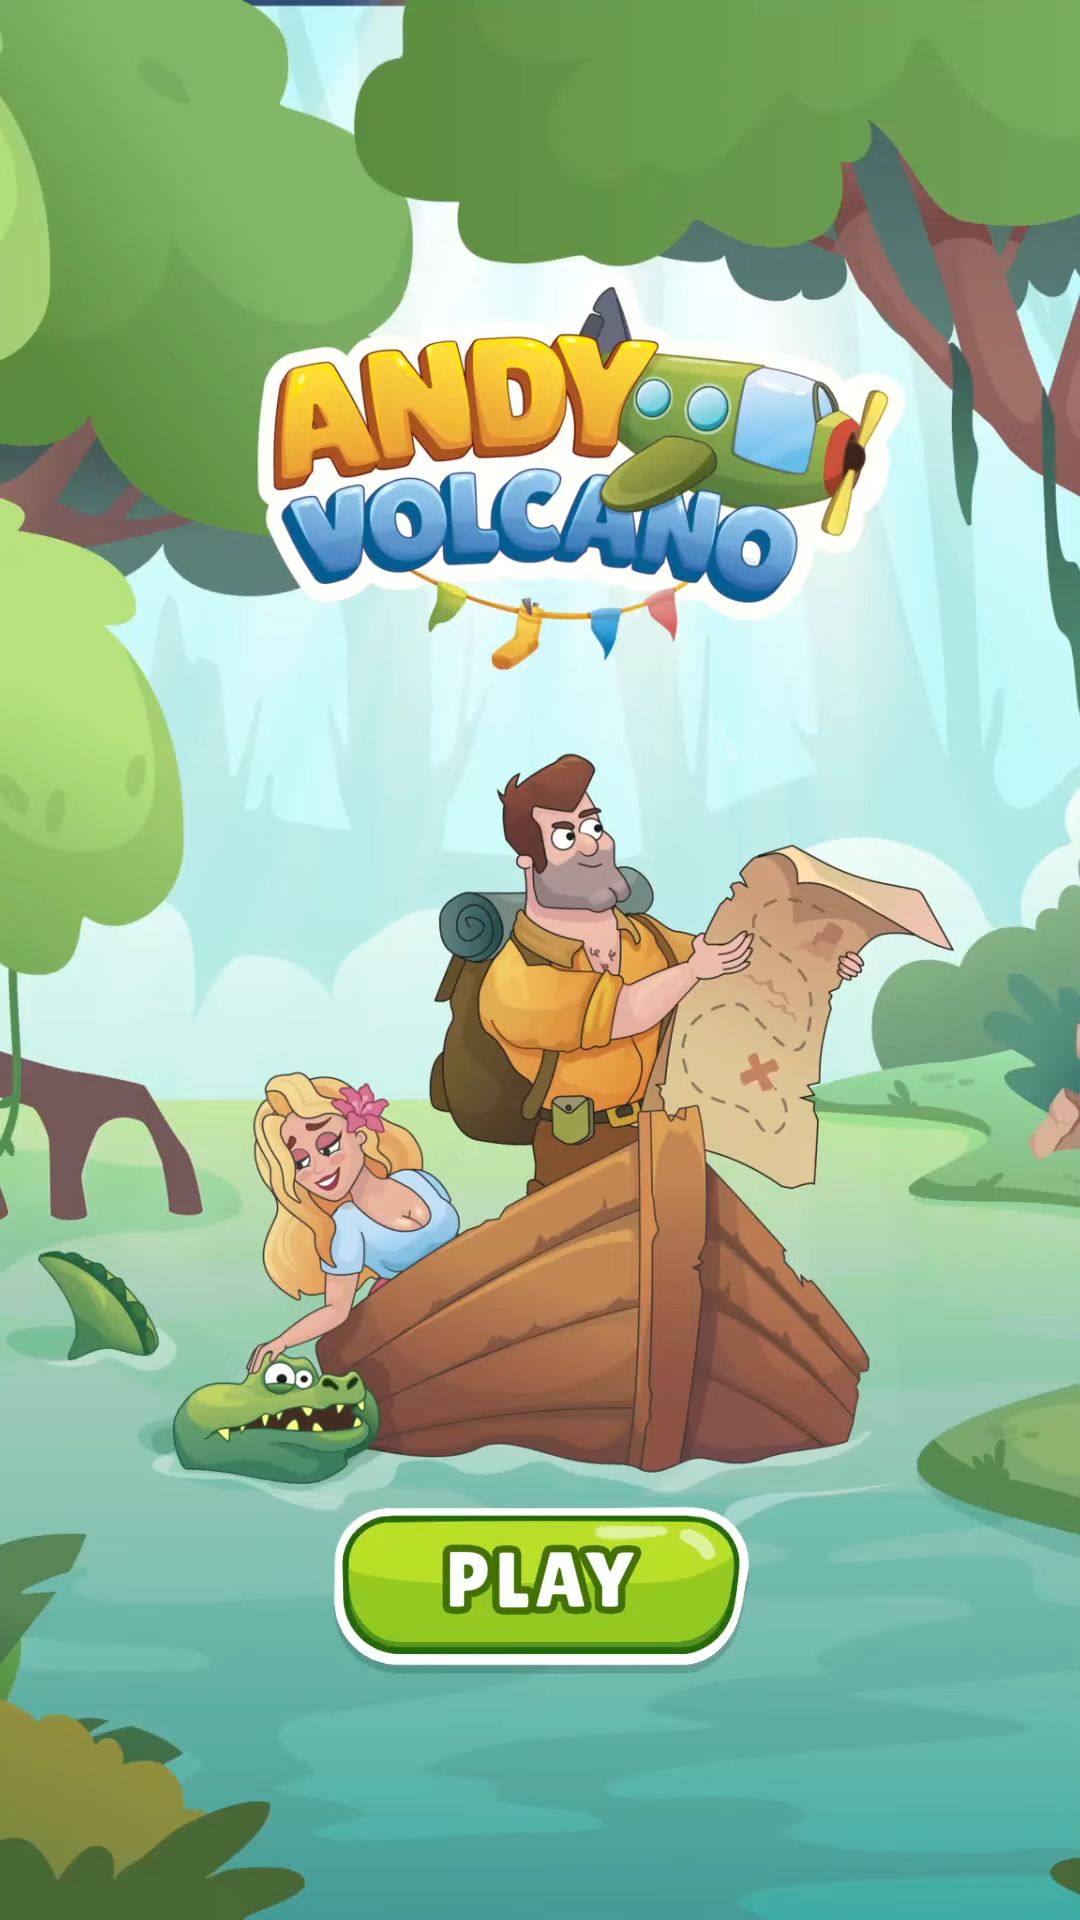 Scarica Andy Volcano: Tile Match Story gratis per Android.